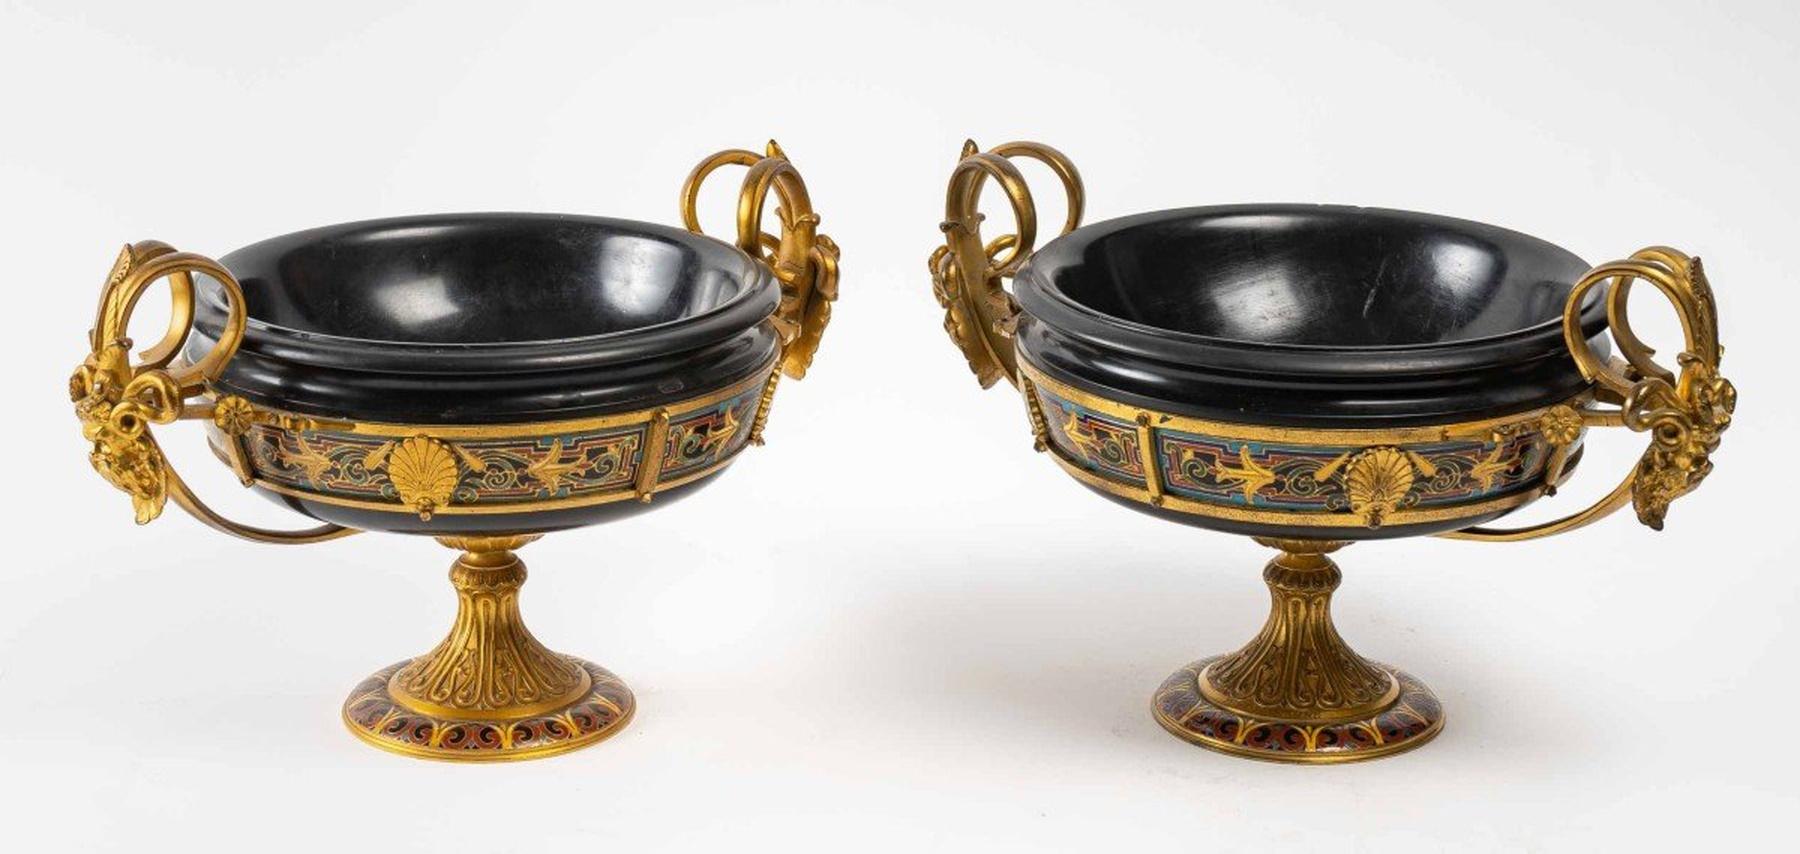 A pair of bronze and black marble cups,
signed on the terrace F. Barbedienne, late 19th century
H: 19 cm, D: 32 cm 
ref 3295